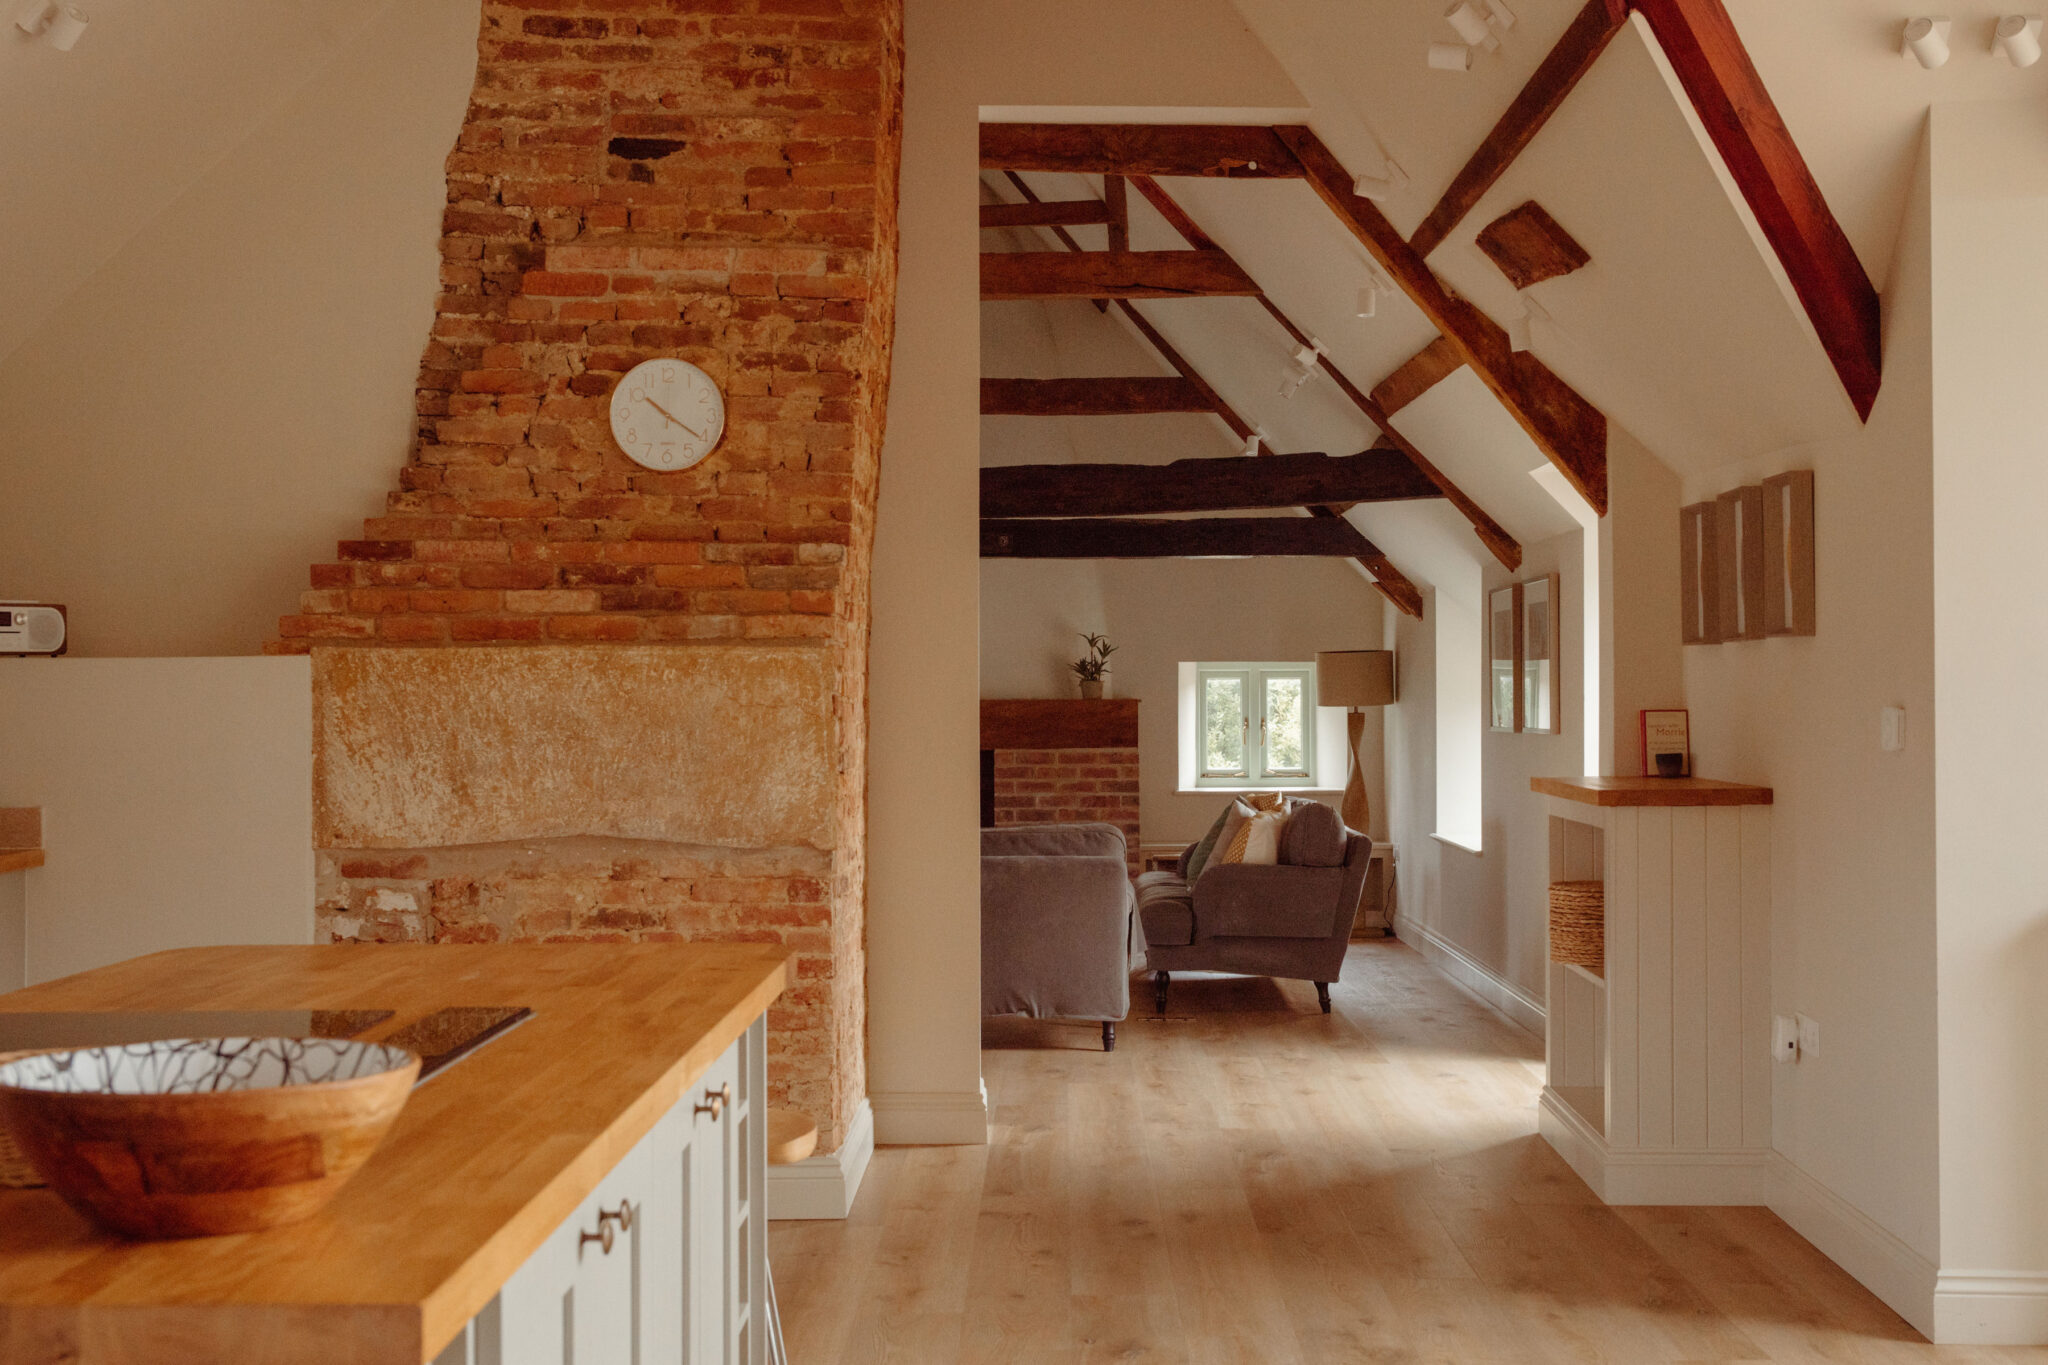 Kitchen and living area in a large country house with wooden beams